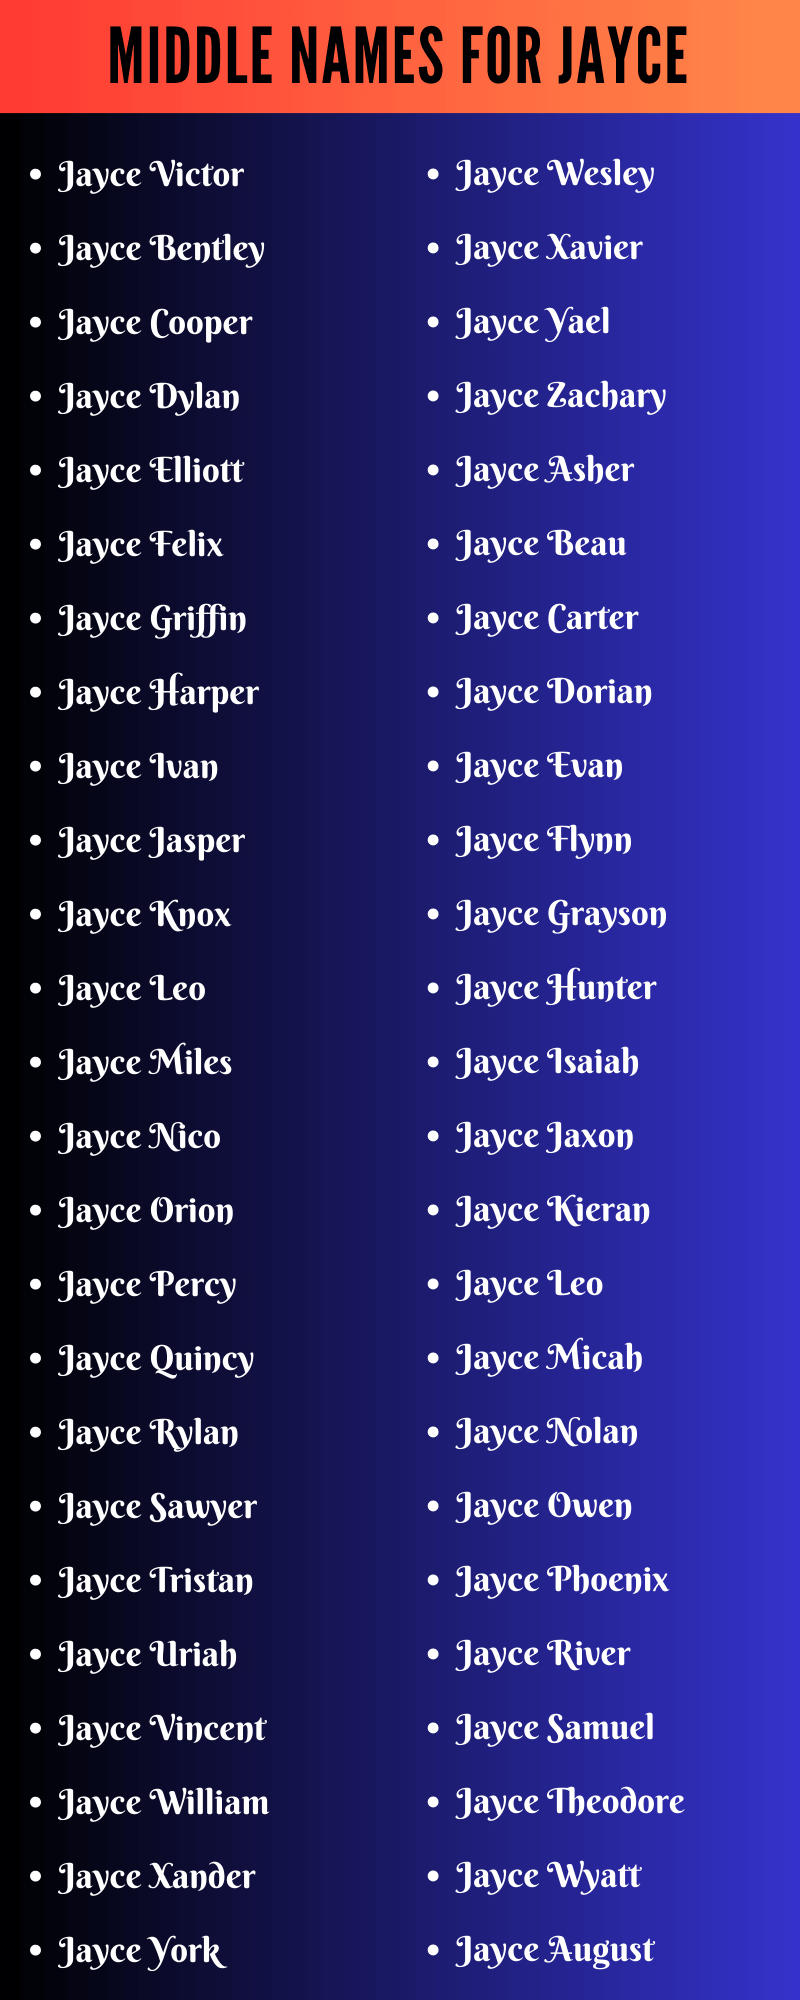 Middle Names For Jayce